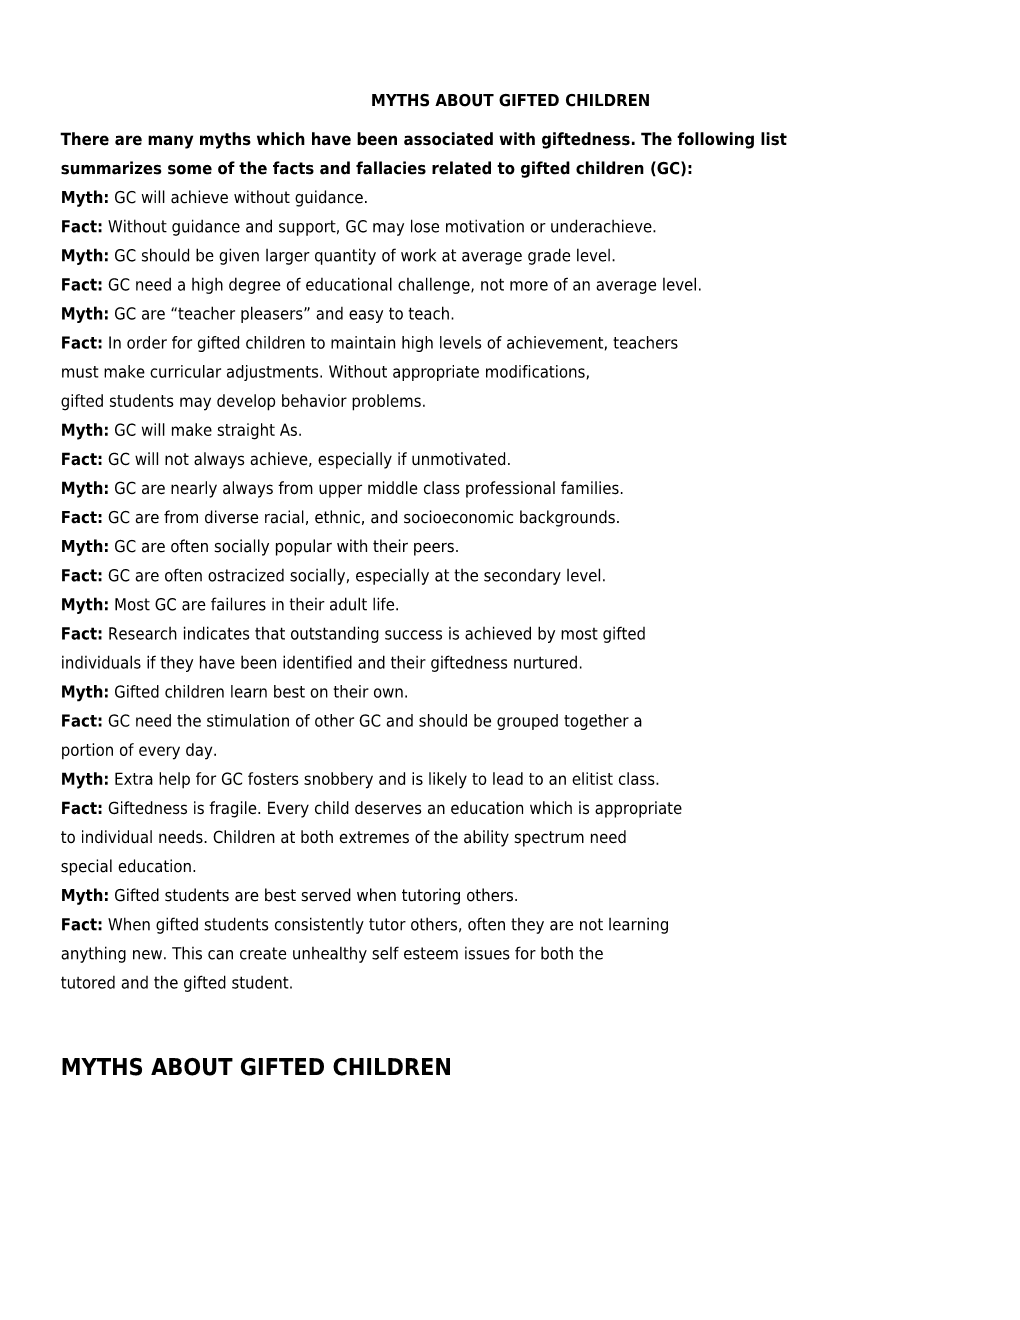 Myths About Gifted Children